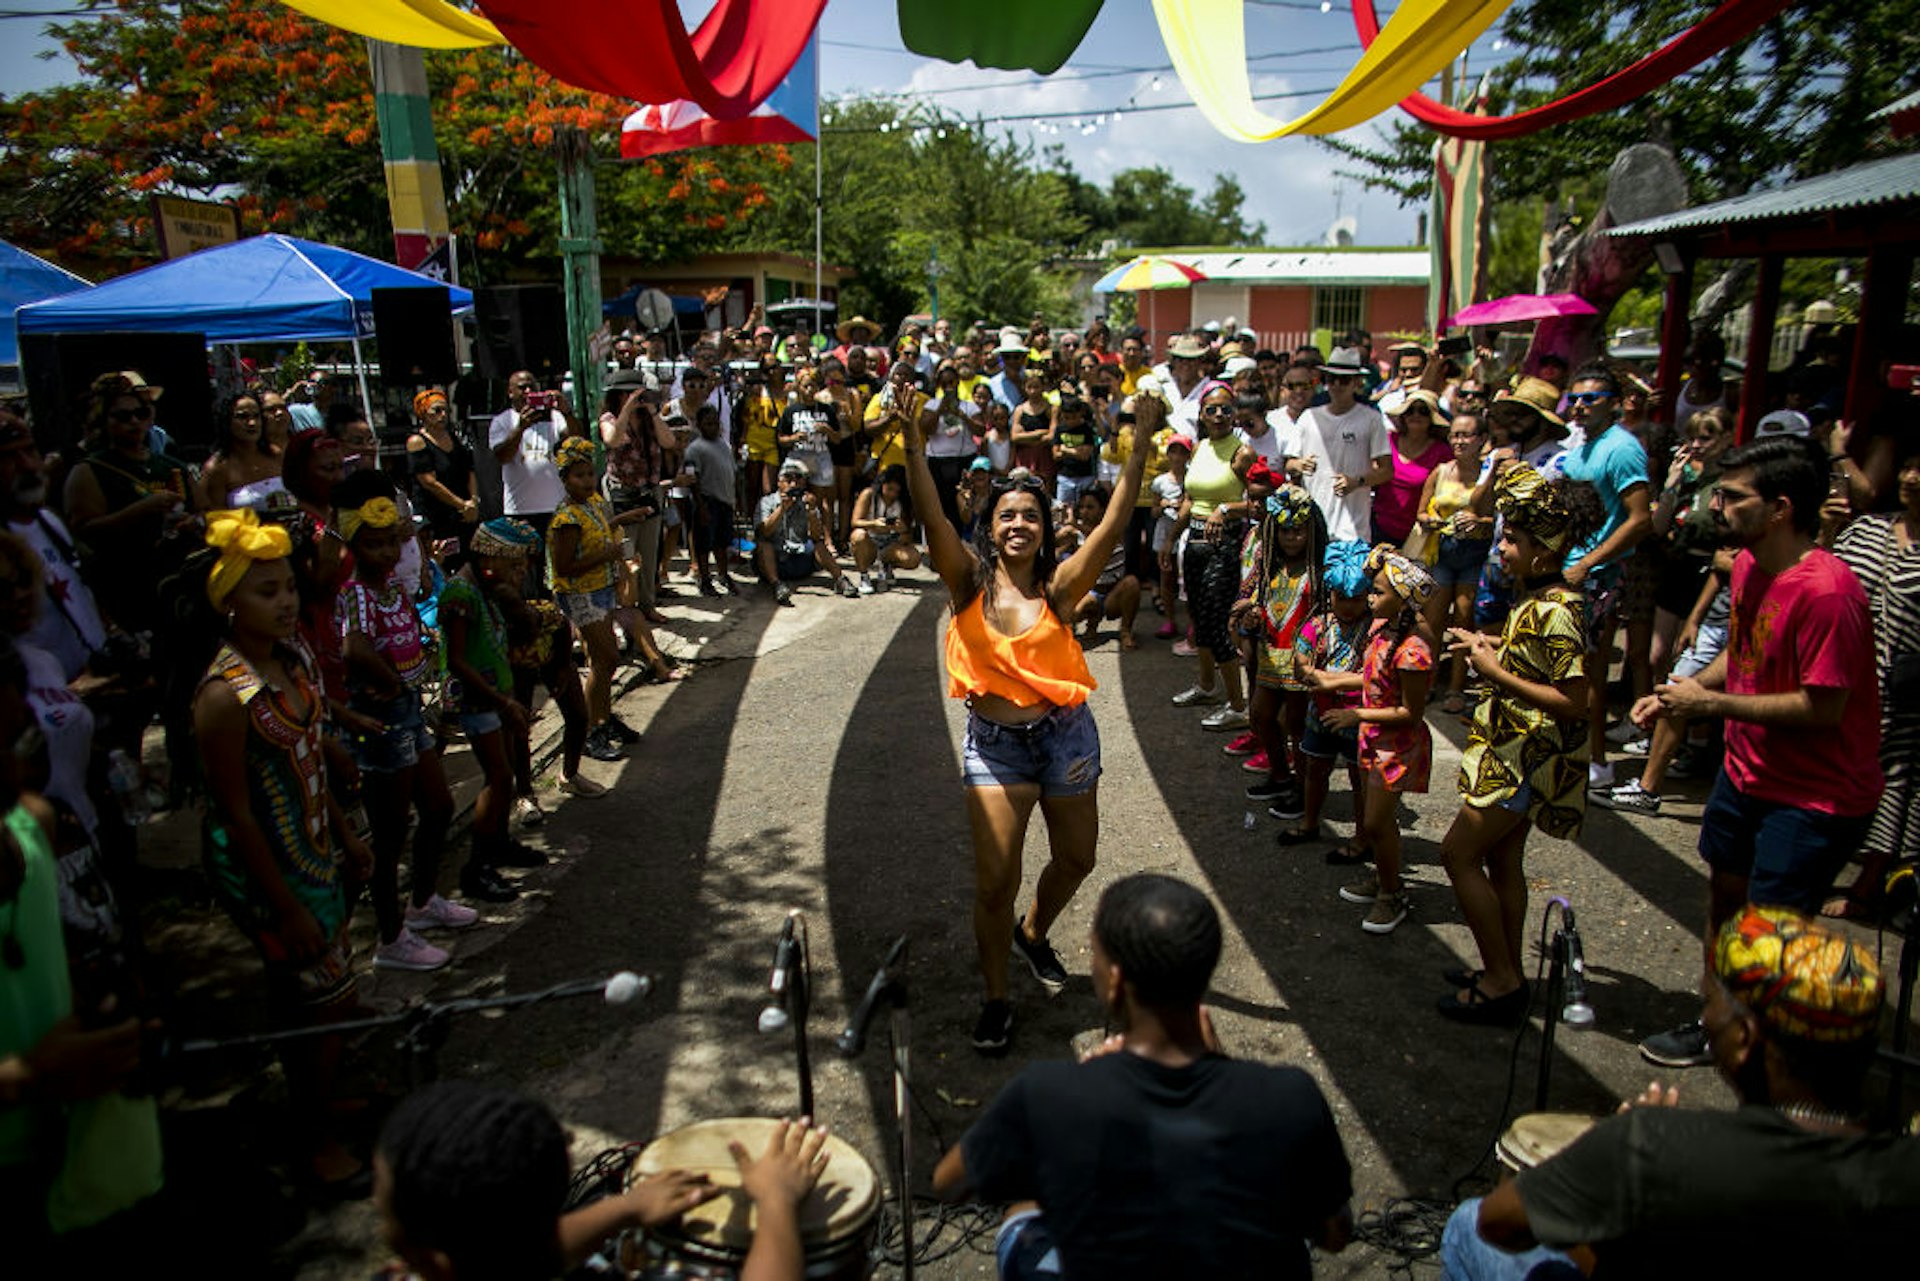 An attendee dances during the Saint James the Apostle festival celebrations in Loiza, Puerto Rico,